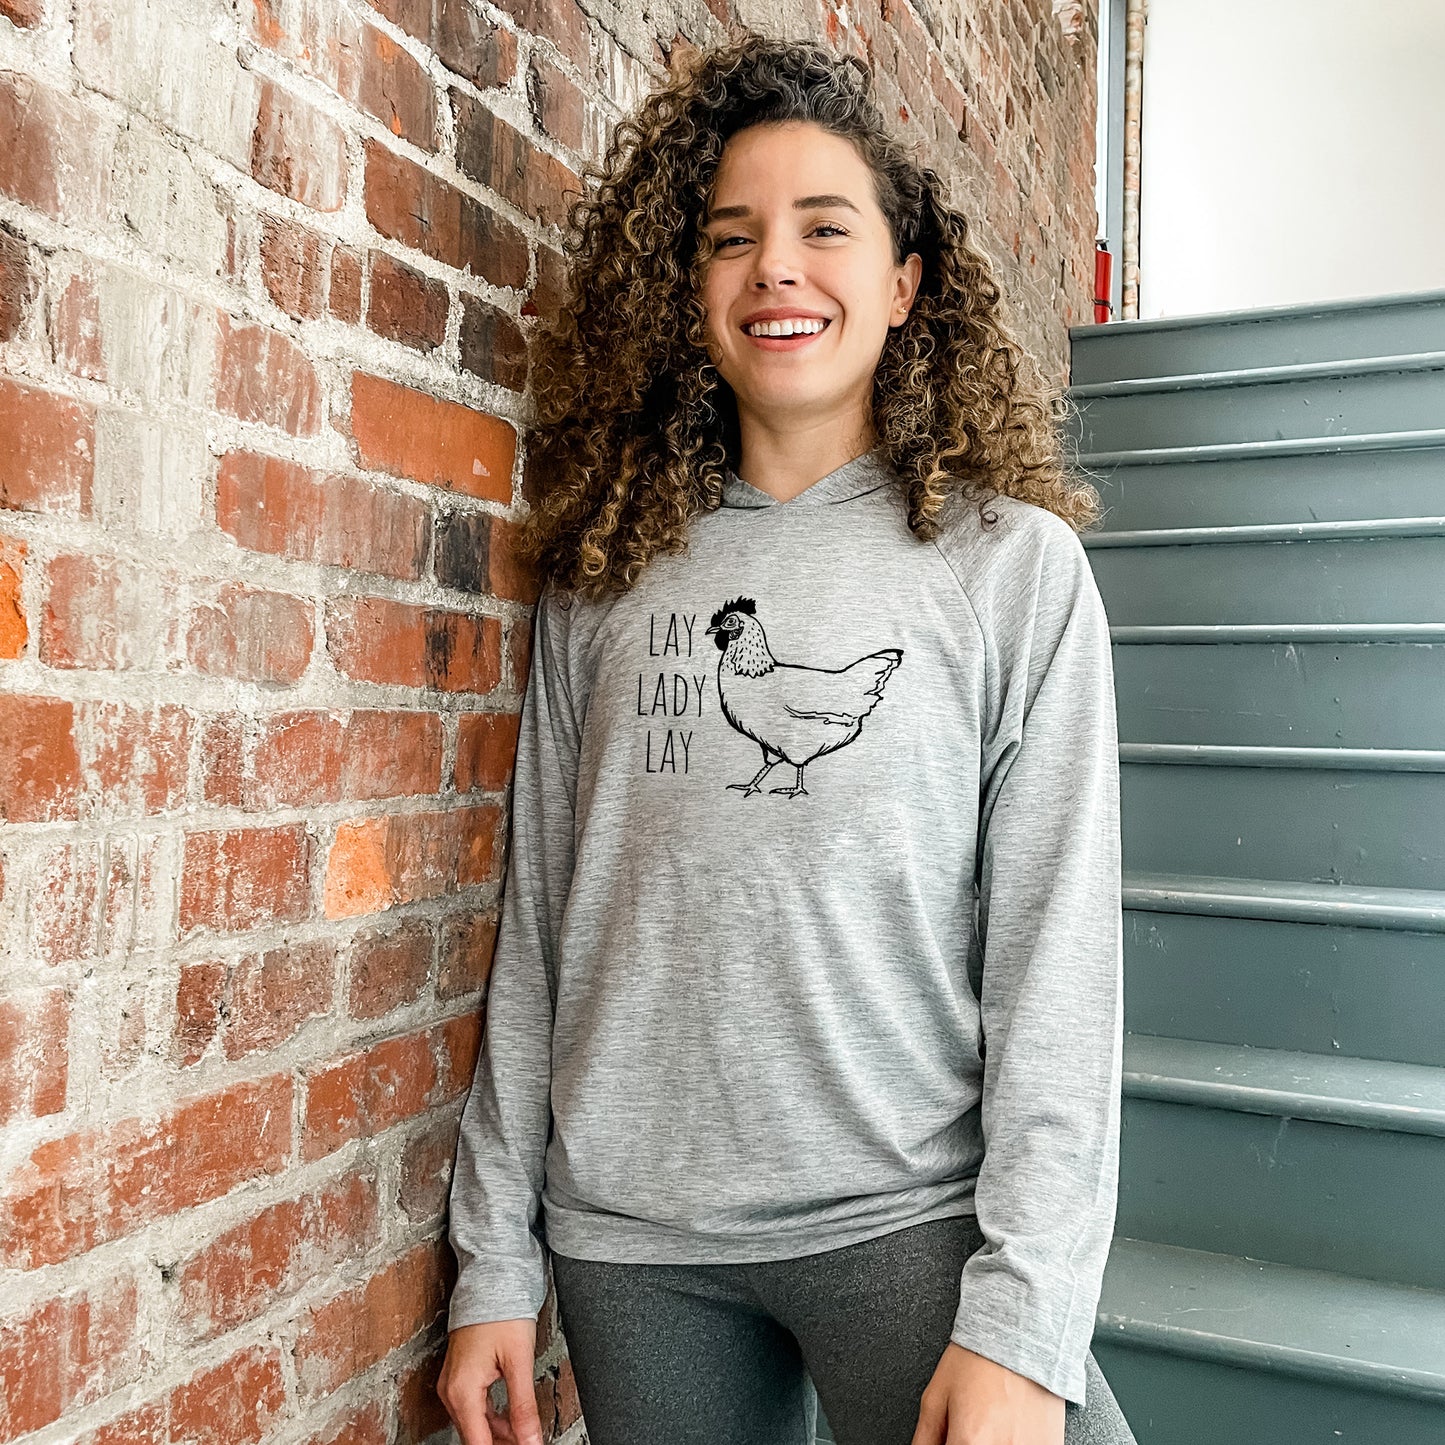 Lay Lady Lay (Chicken) - Unisex T-Shirt Hoodie - Heather Gray